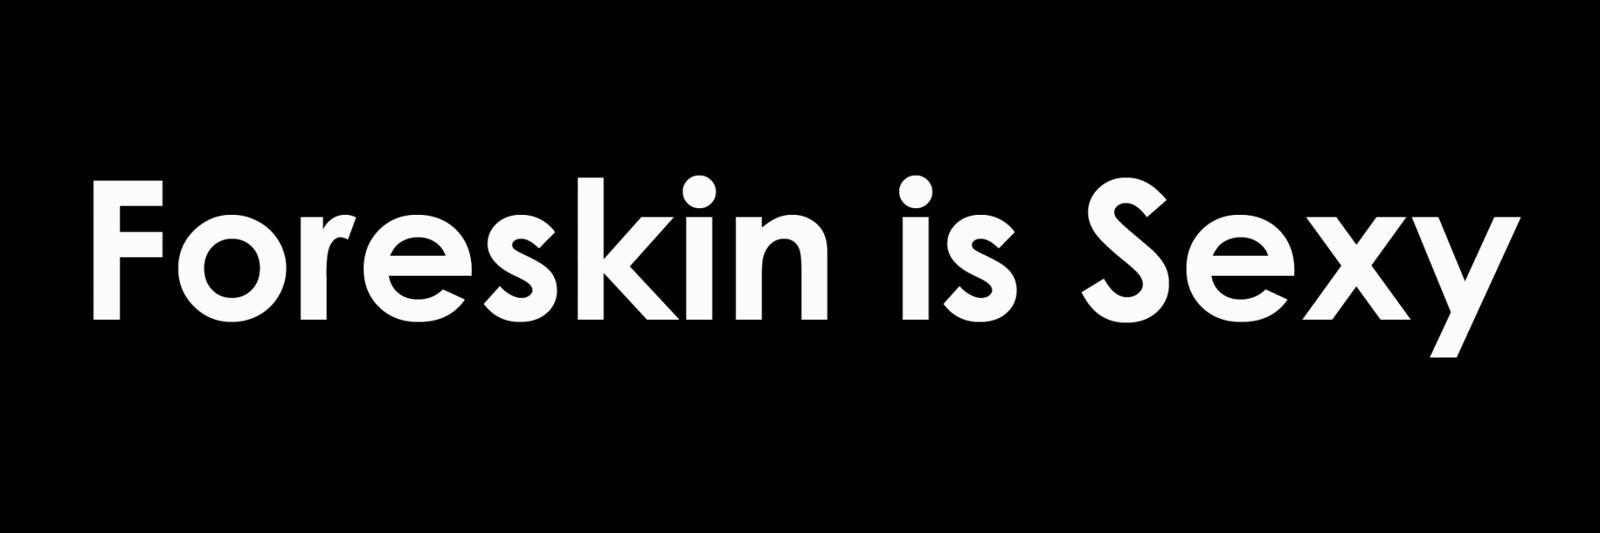 Cover photo of foreskinissexy